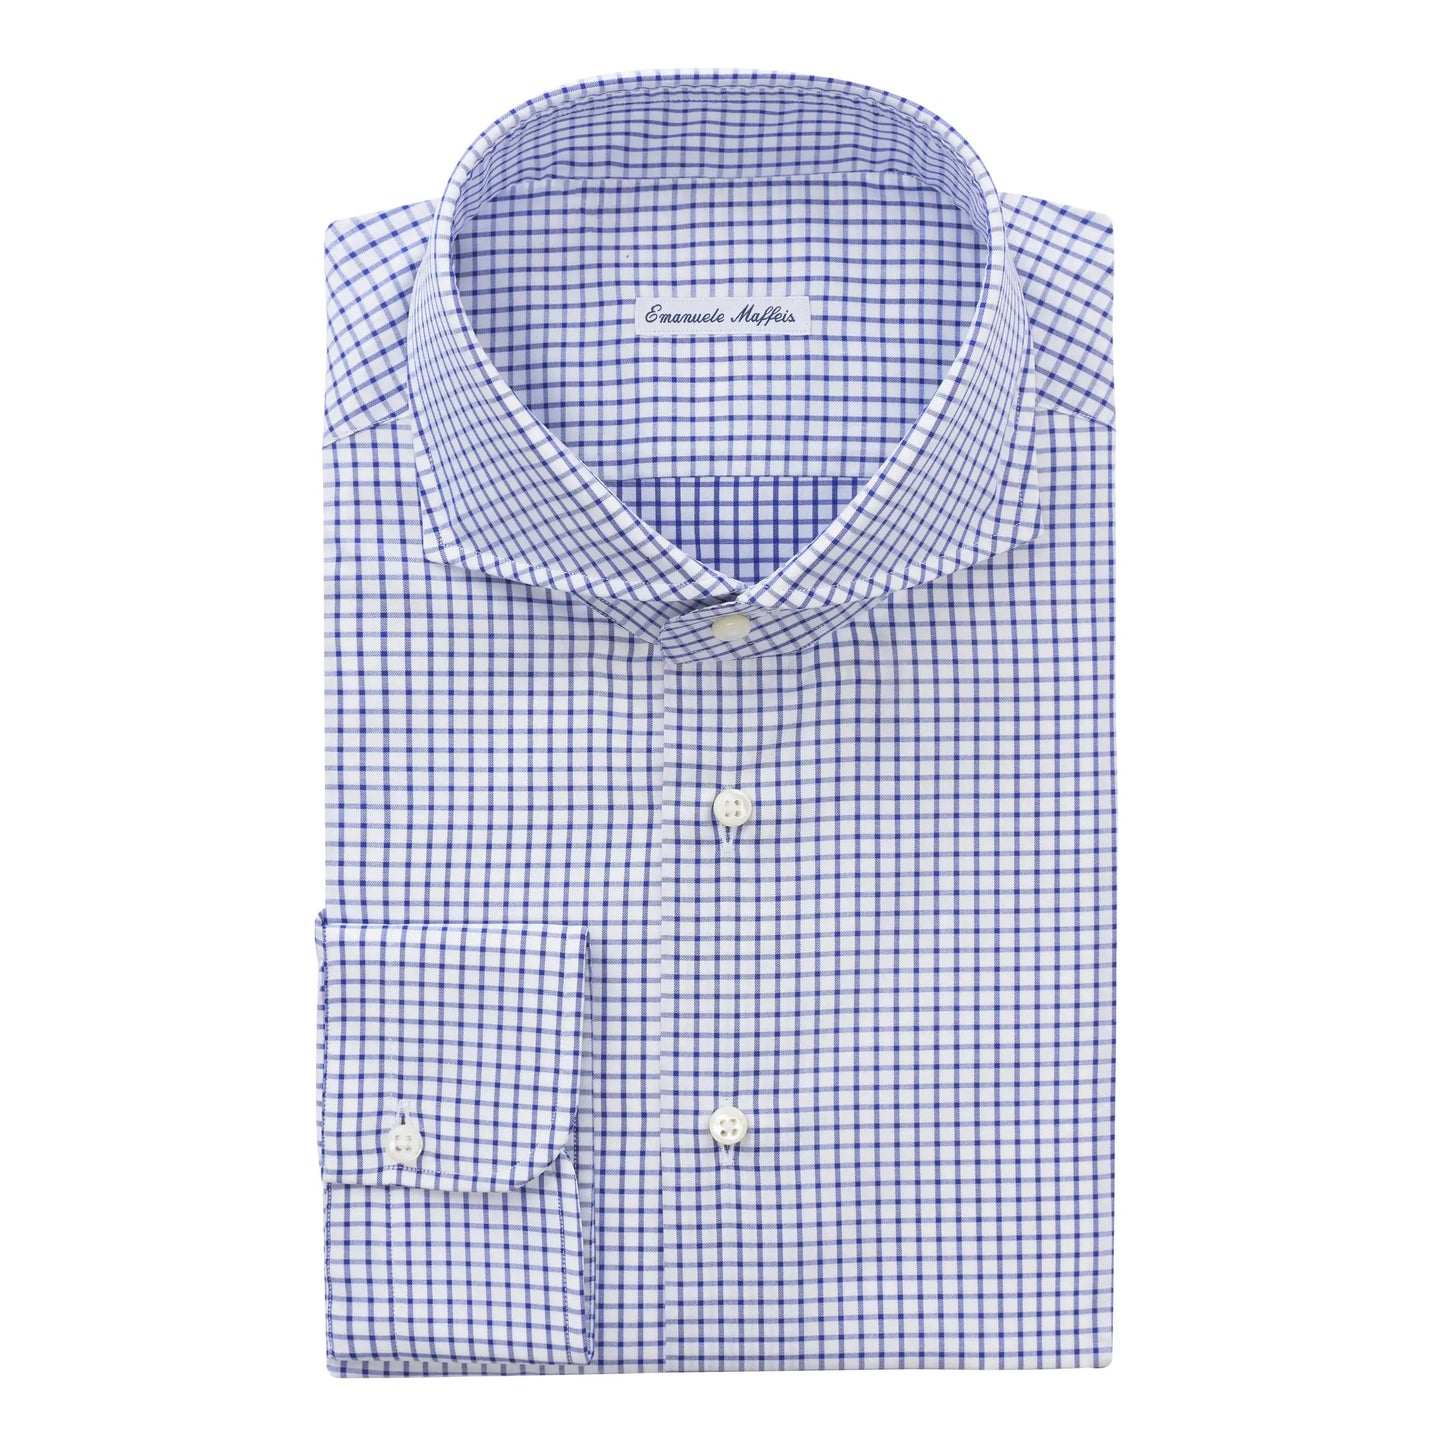 Finest Cotton Checked Blue Shirt with Shark Collar